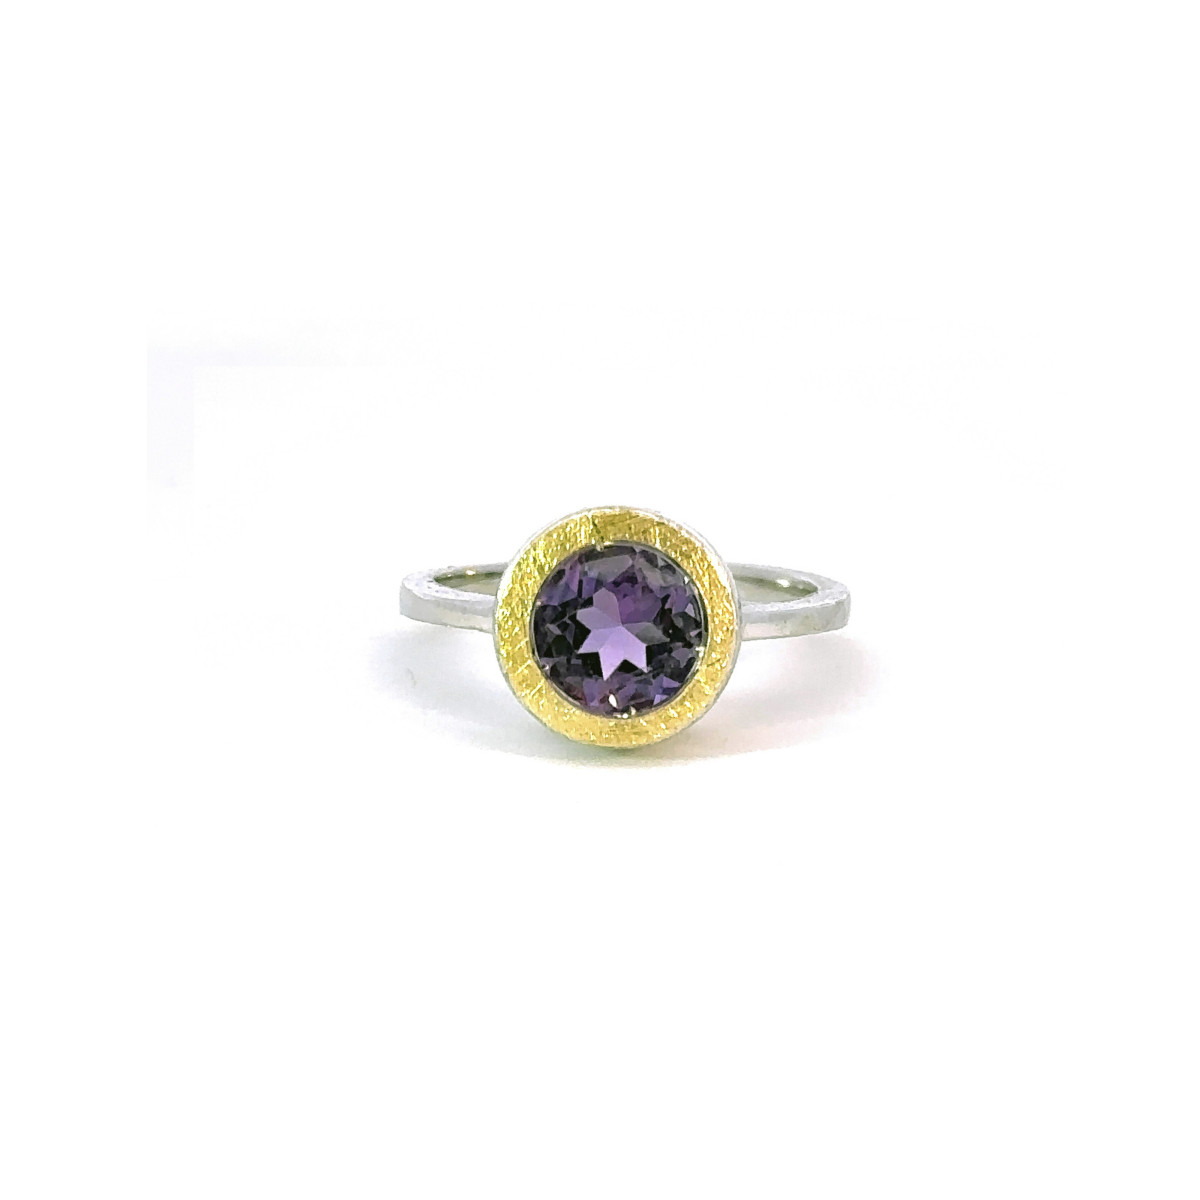 Silver, gold and amethyst ring